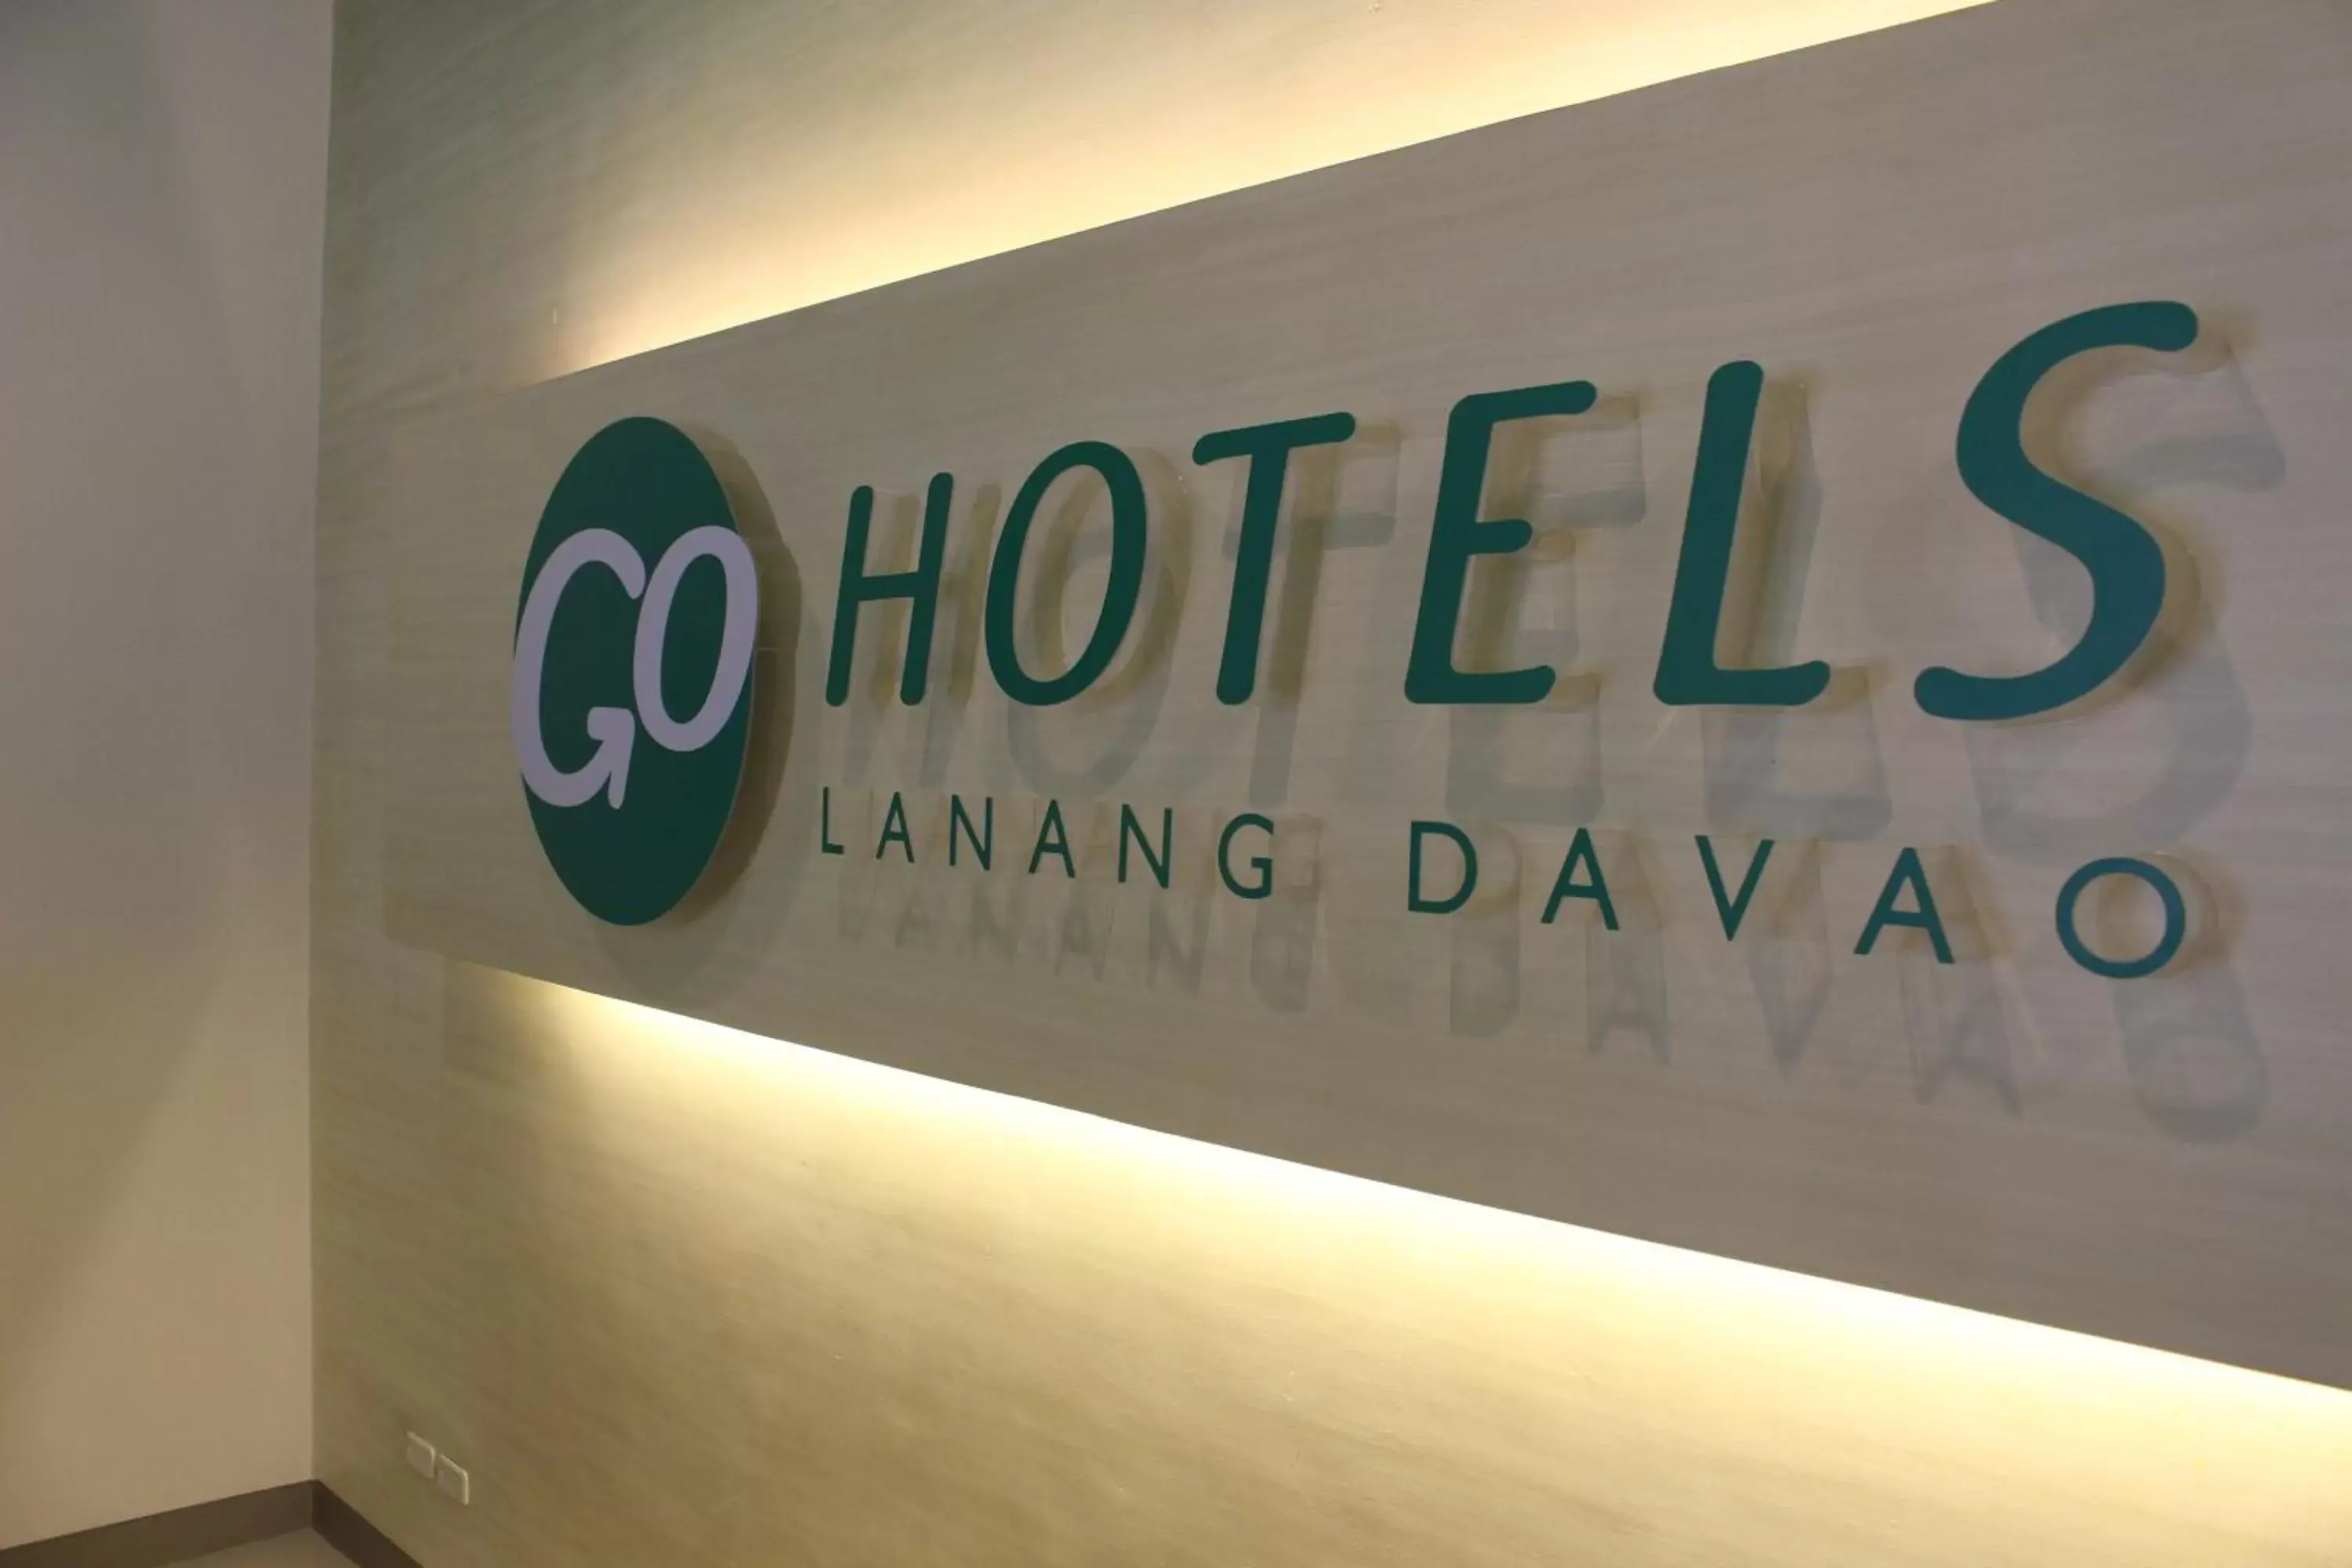 Property logo or sign in Go Hotels Lanang - Davao